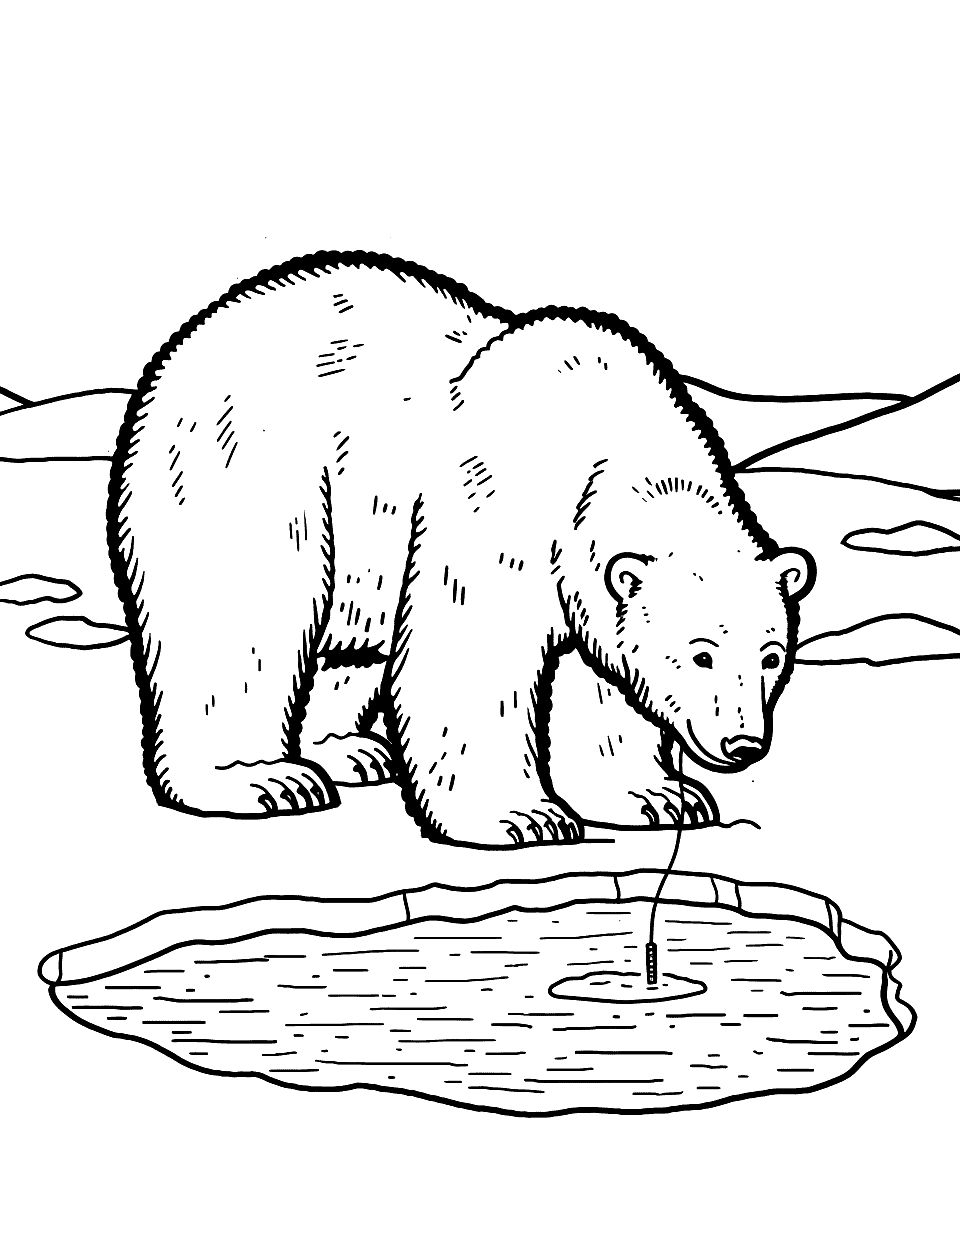 Winter Fishing Polar Bear Coloring Page - A polar bear is standing by a fishing hole in the ice looking for fish.